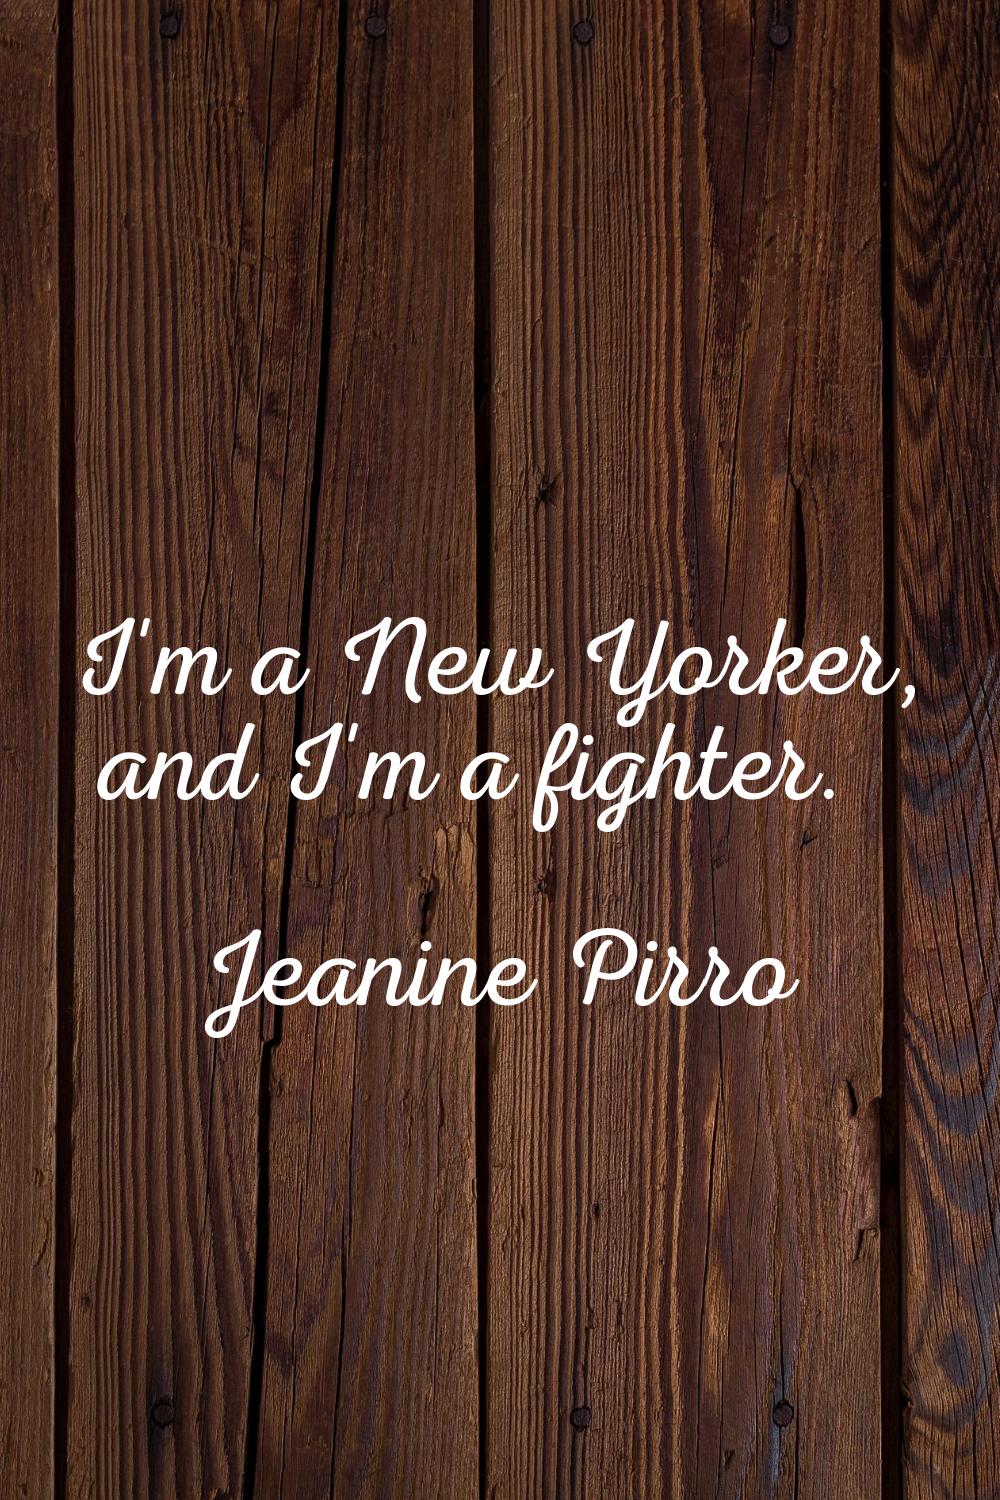 I'm a New Yorker, and I'm a fighter.